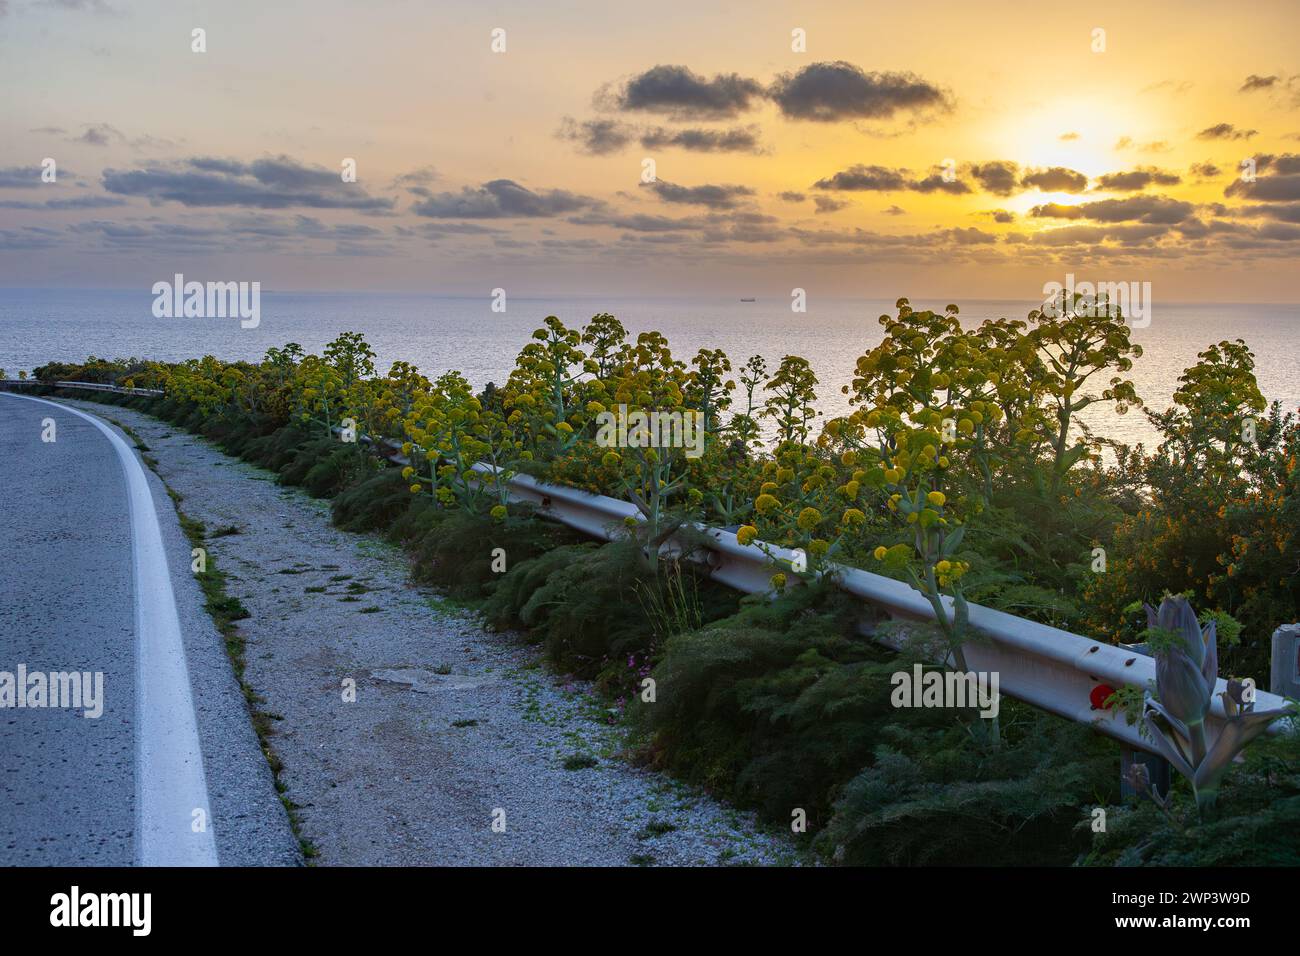 Amarantos plant blooming near sea with a small chappel near it Stock Photo